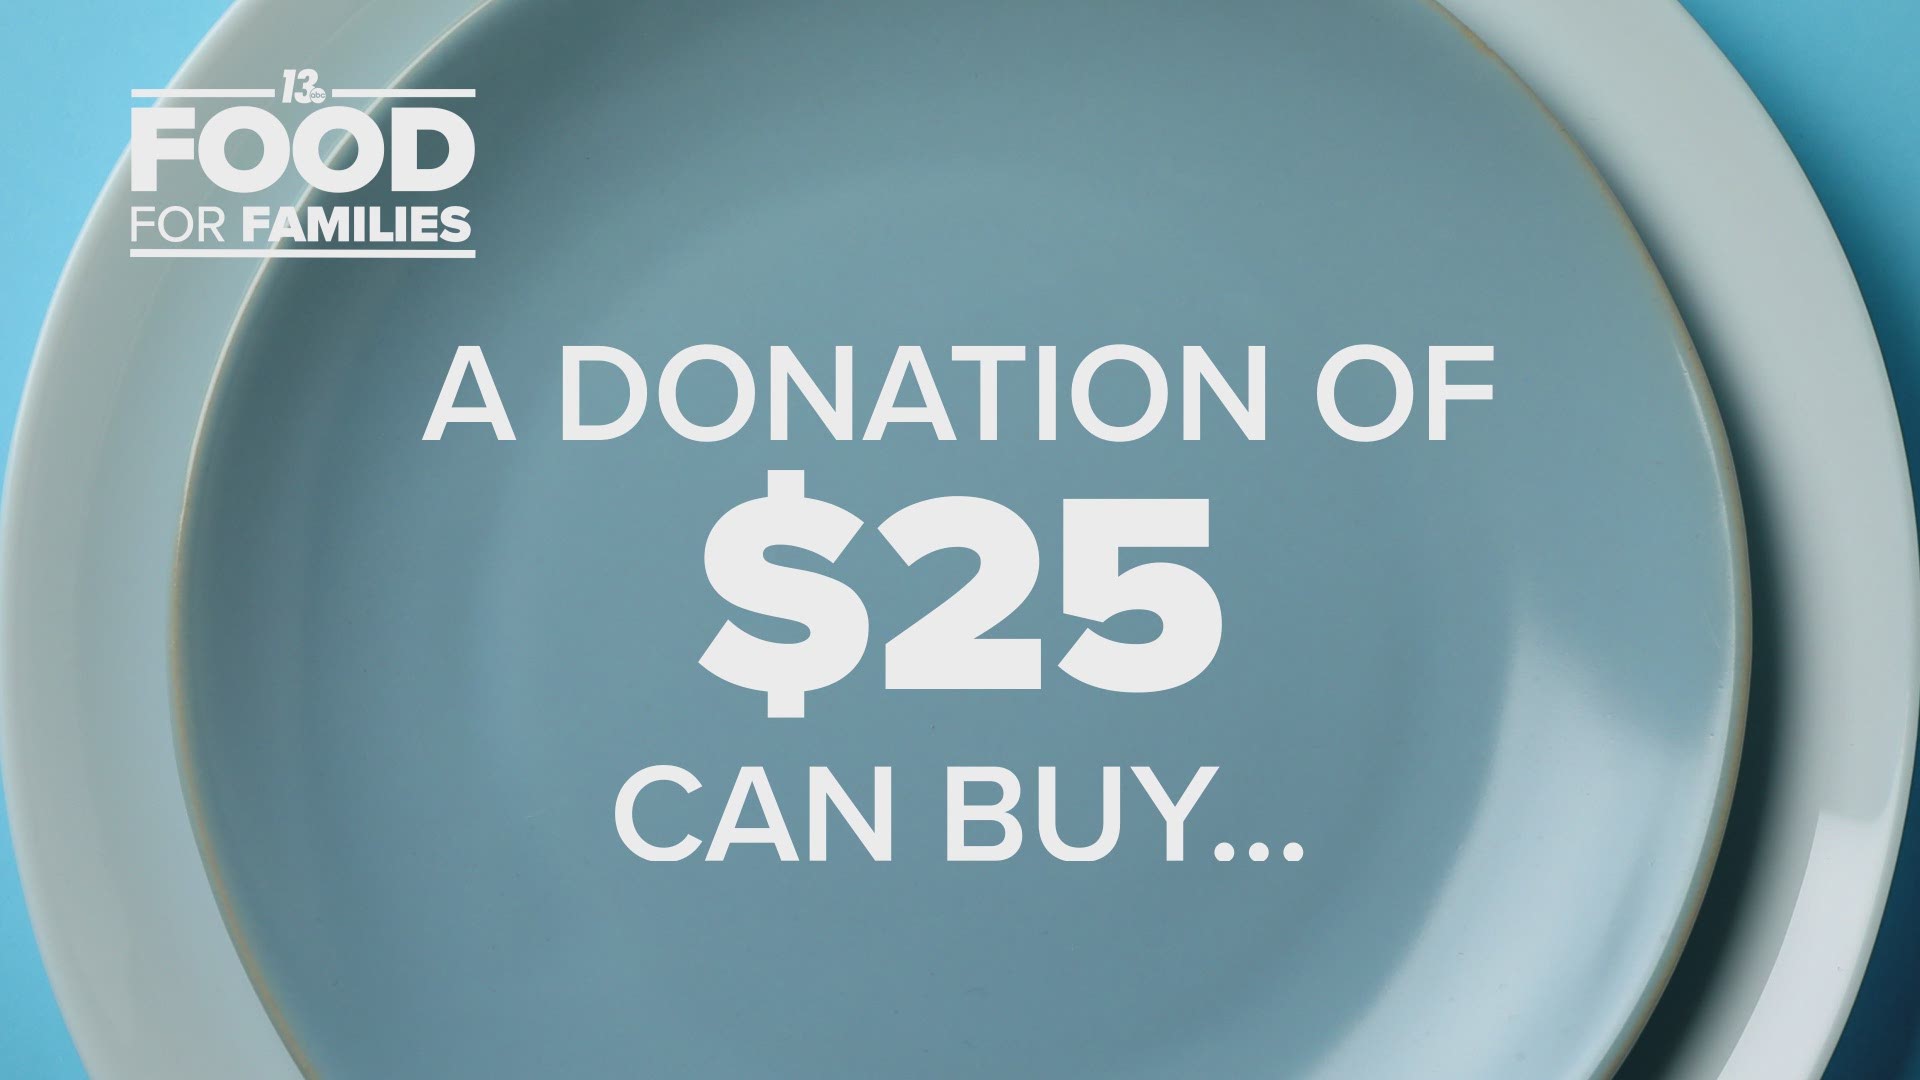 Here's what your donation to 13 Food For Families will provide.